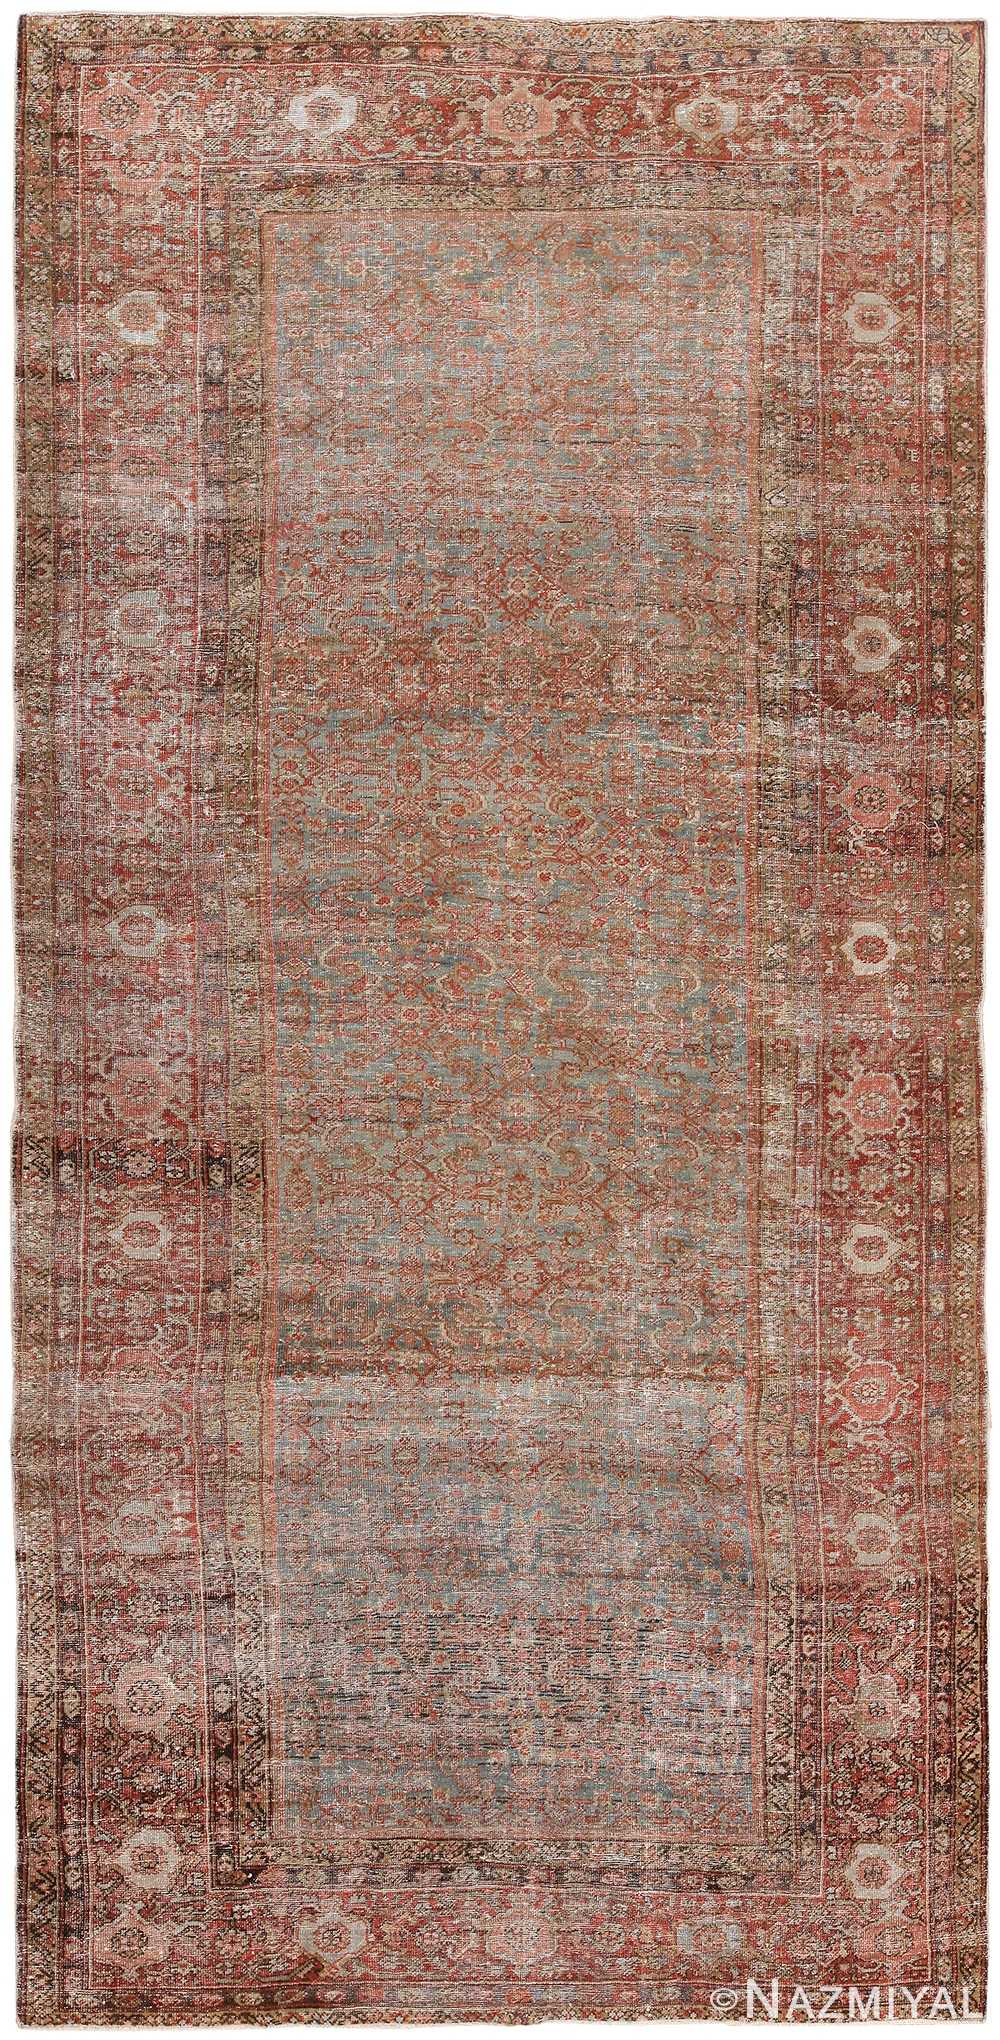 Antique Persian Shabby Chic Area Rug, Shabby Chic Area Rugs